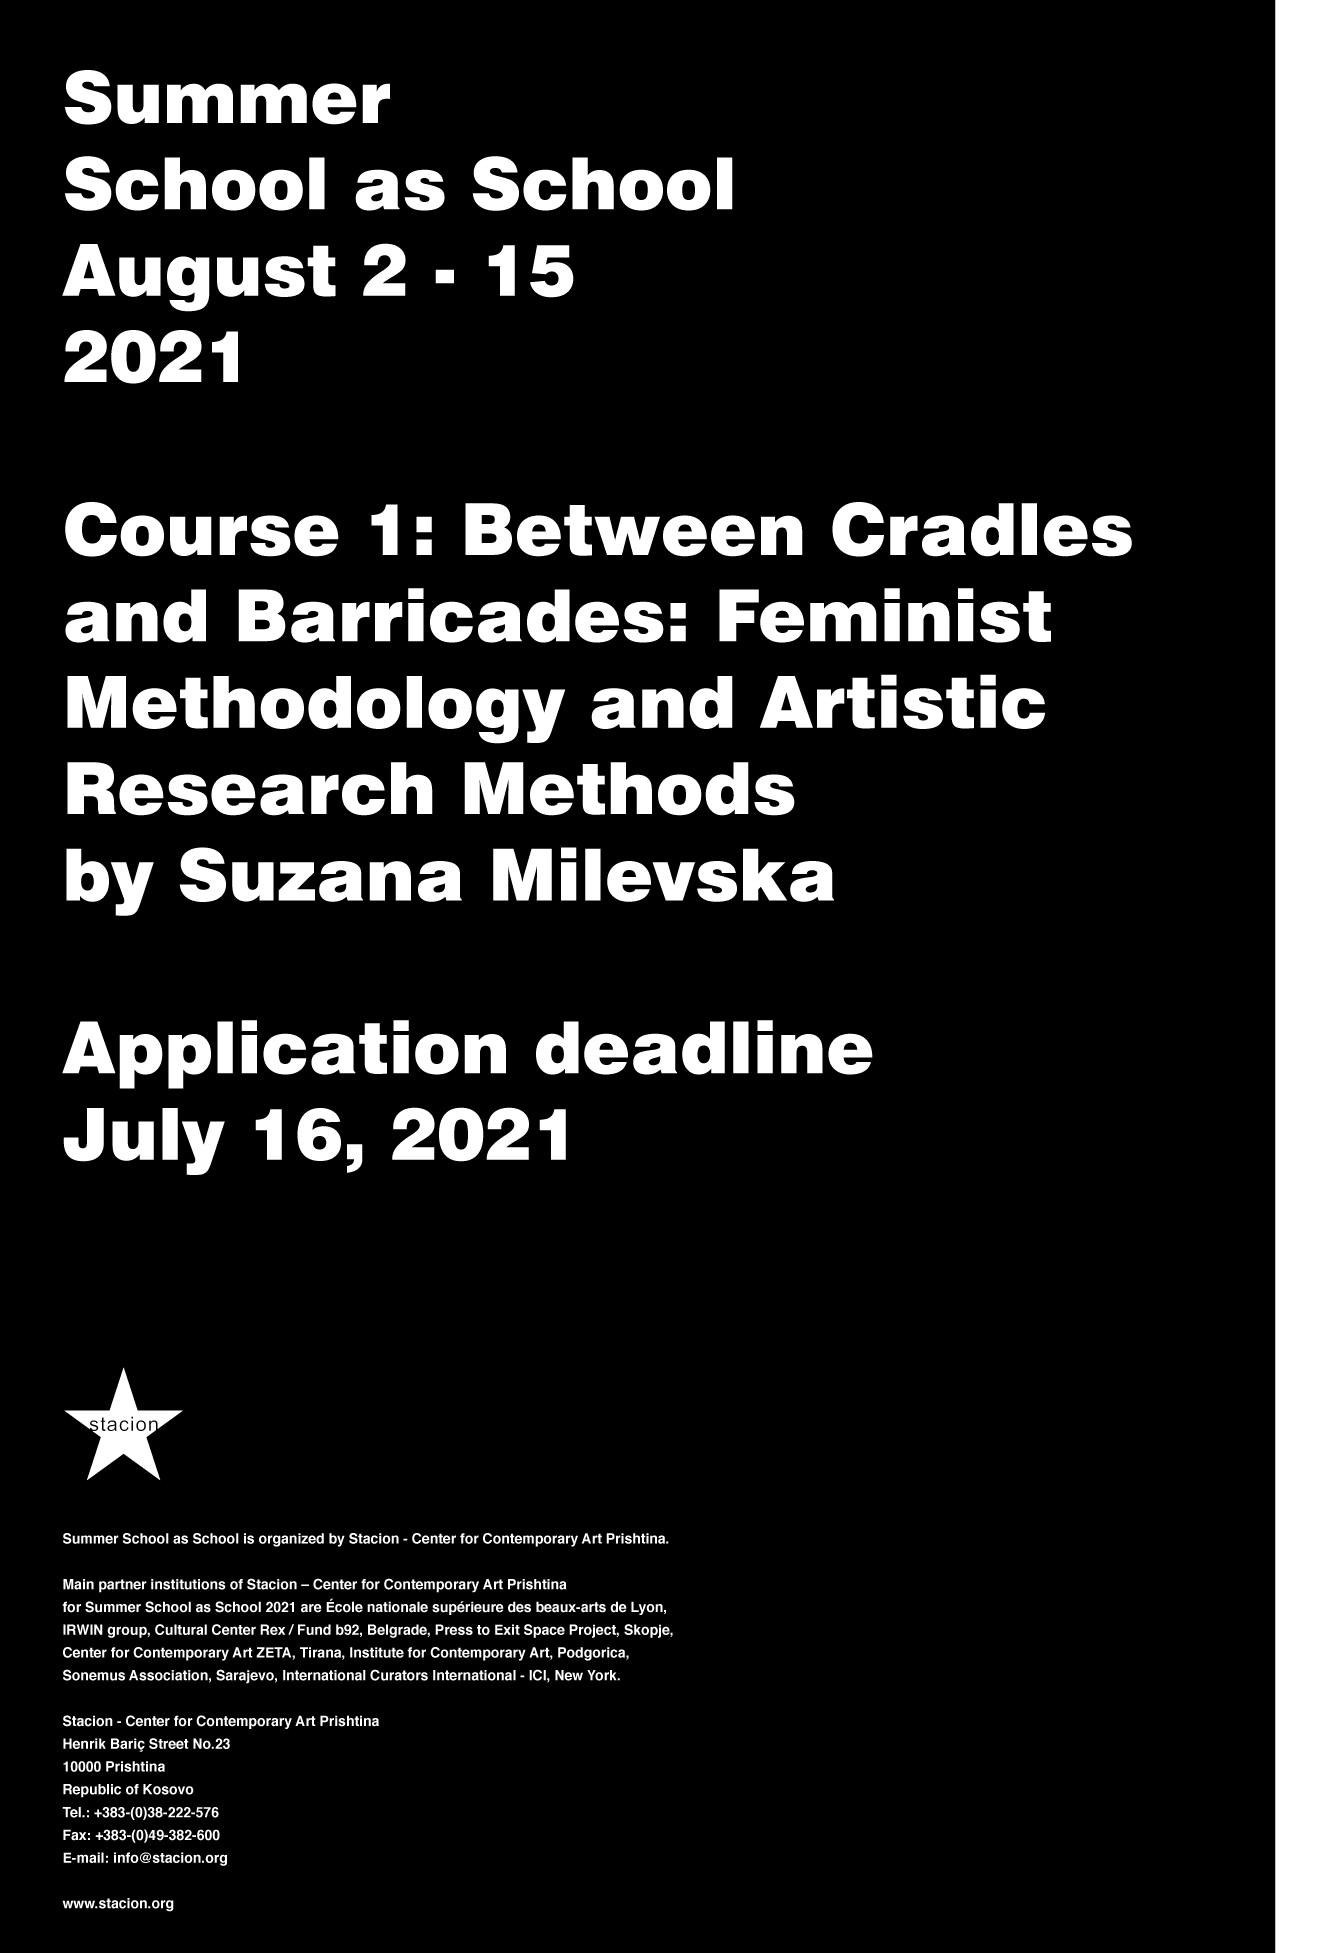 Course 1: Between Cradles and Barricades: Feminist Methodology and Artistic Research Methods